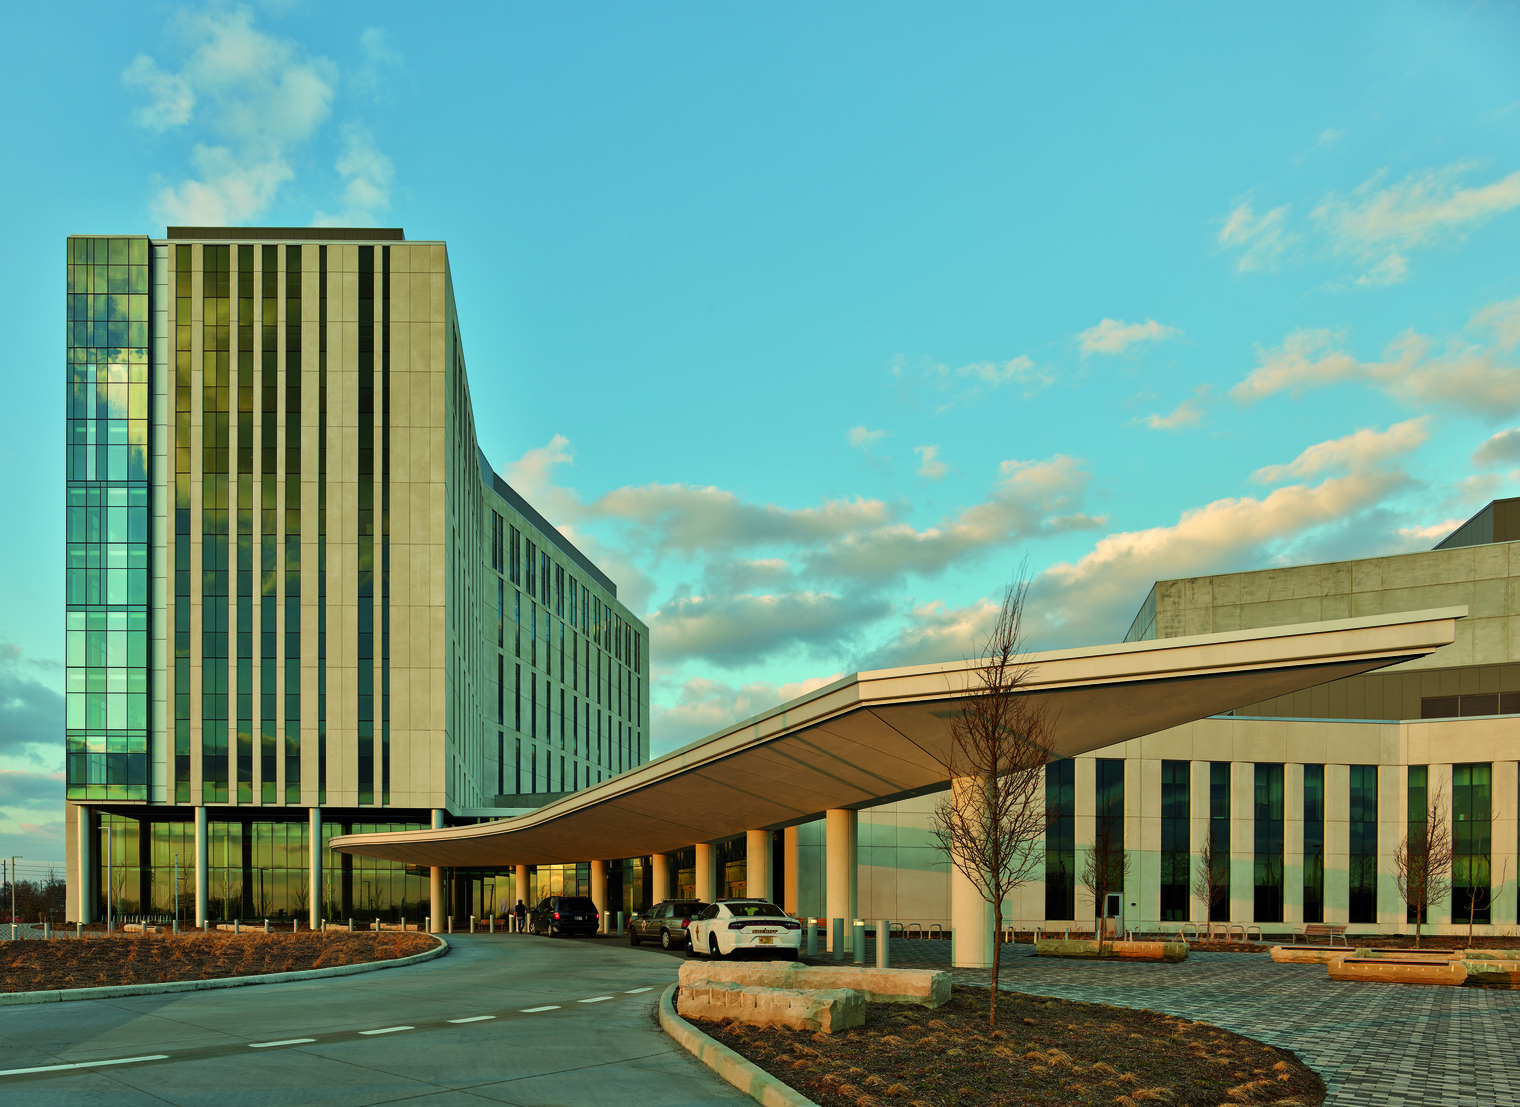 Indiana Marion County Community Justice Campus